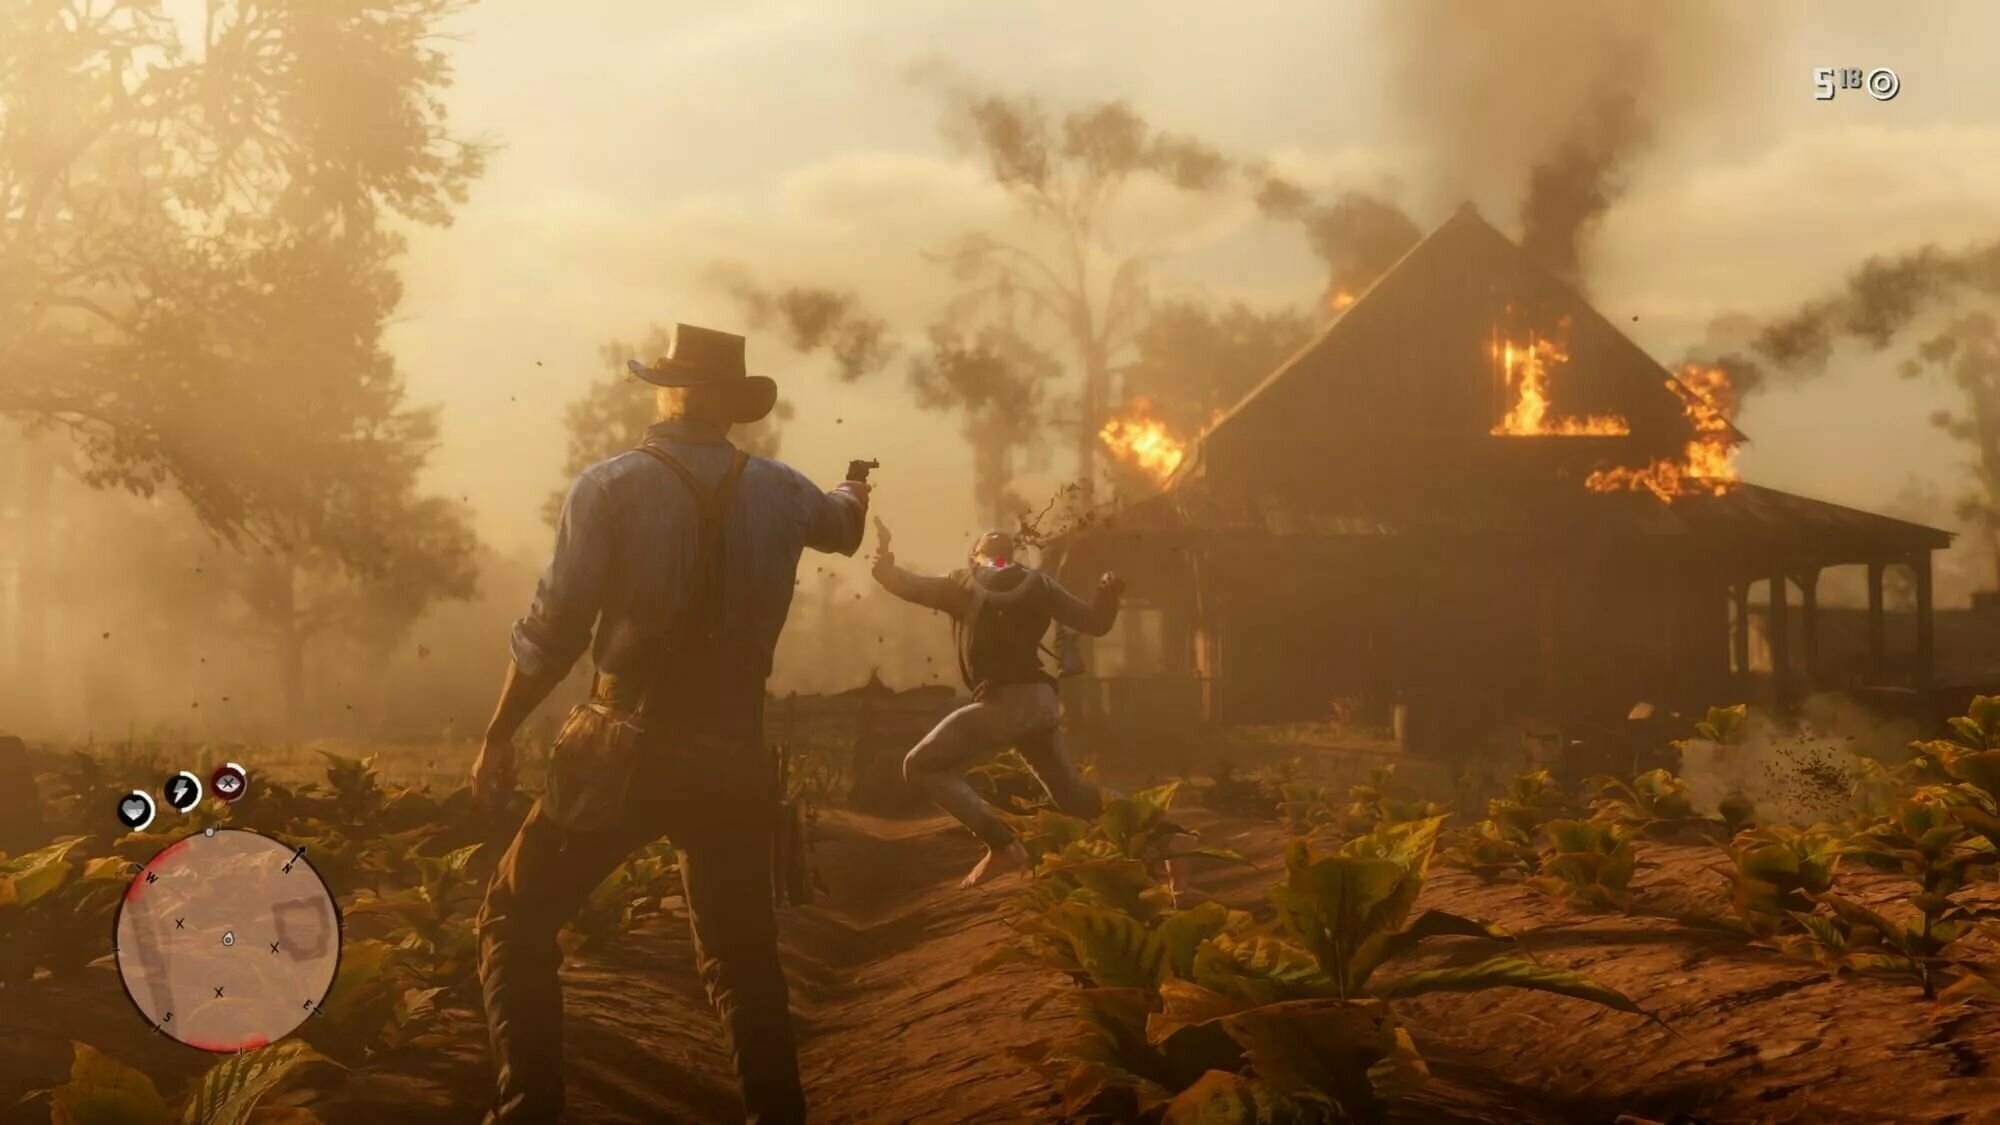 Игра Red Dead Redemption 2